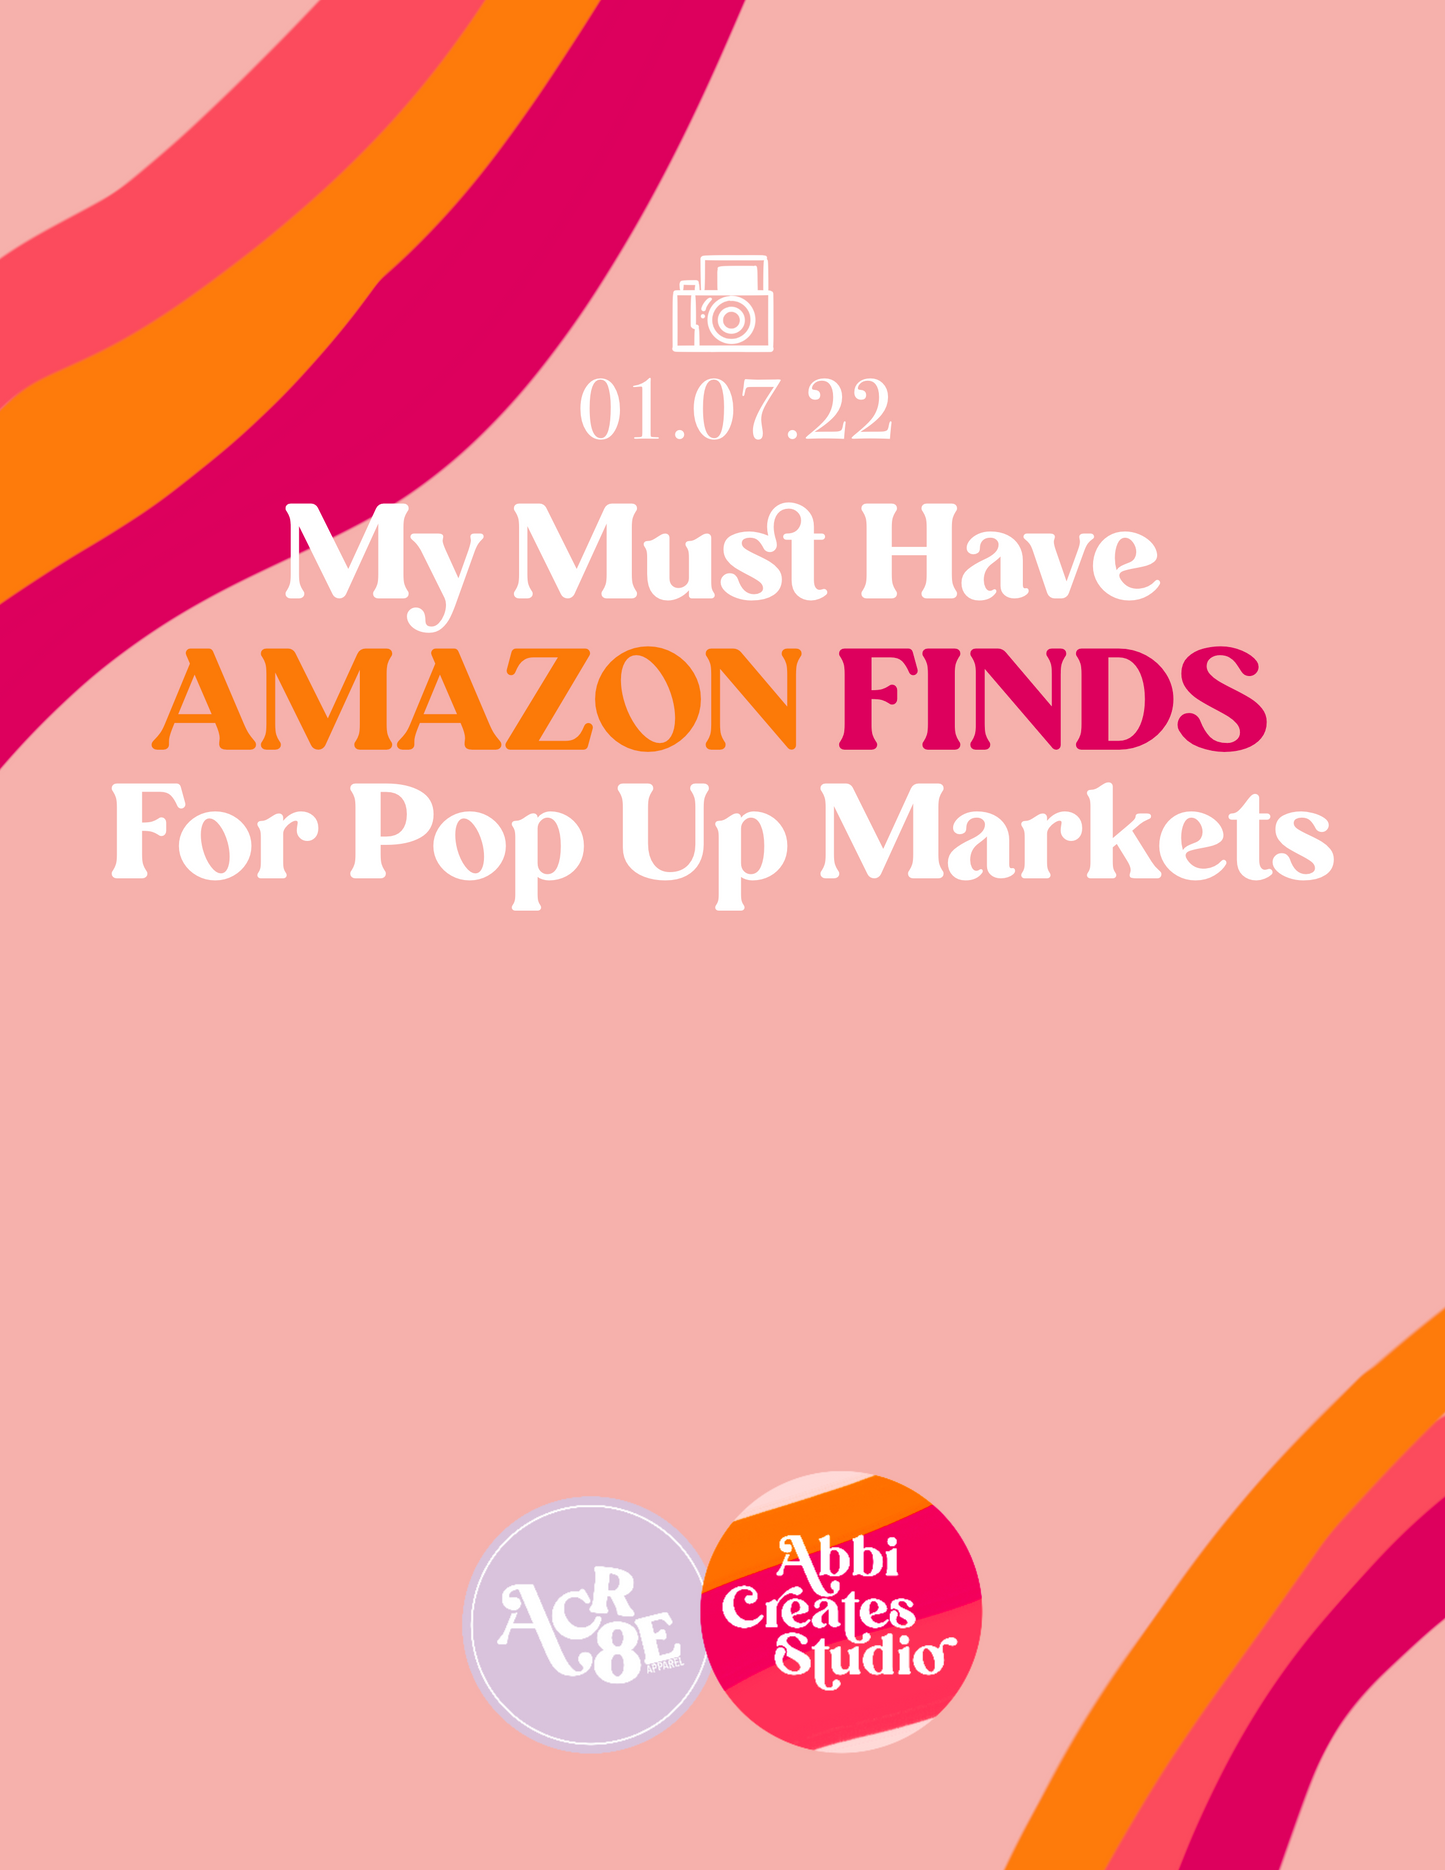 Amazon Small Business Finds for Pop Up Markets